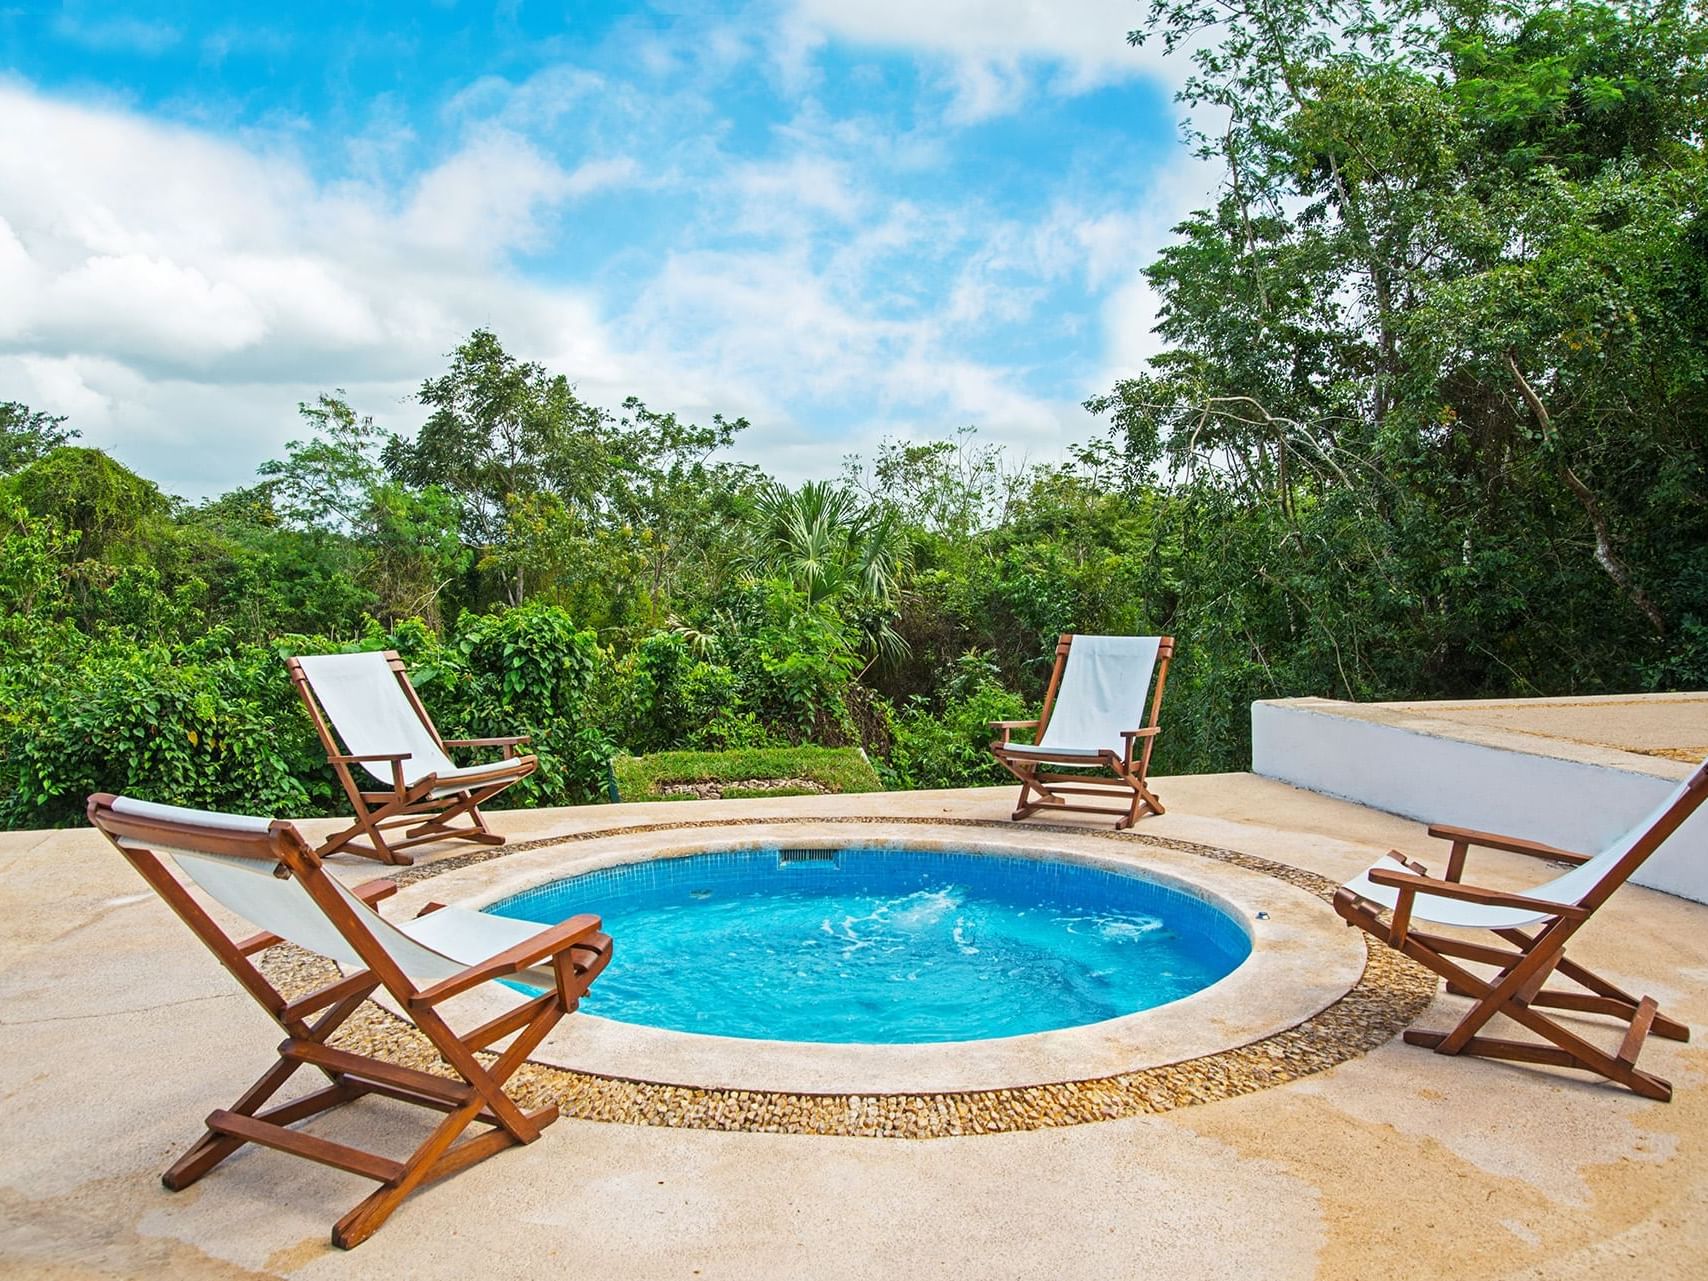 Outdoor jacuzzi with lounge chairs at La Coleccion Resorts